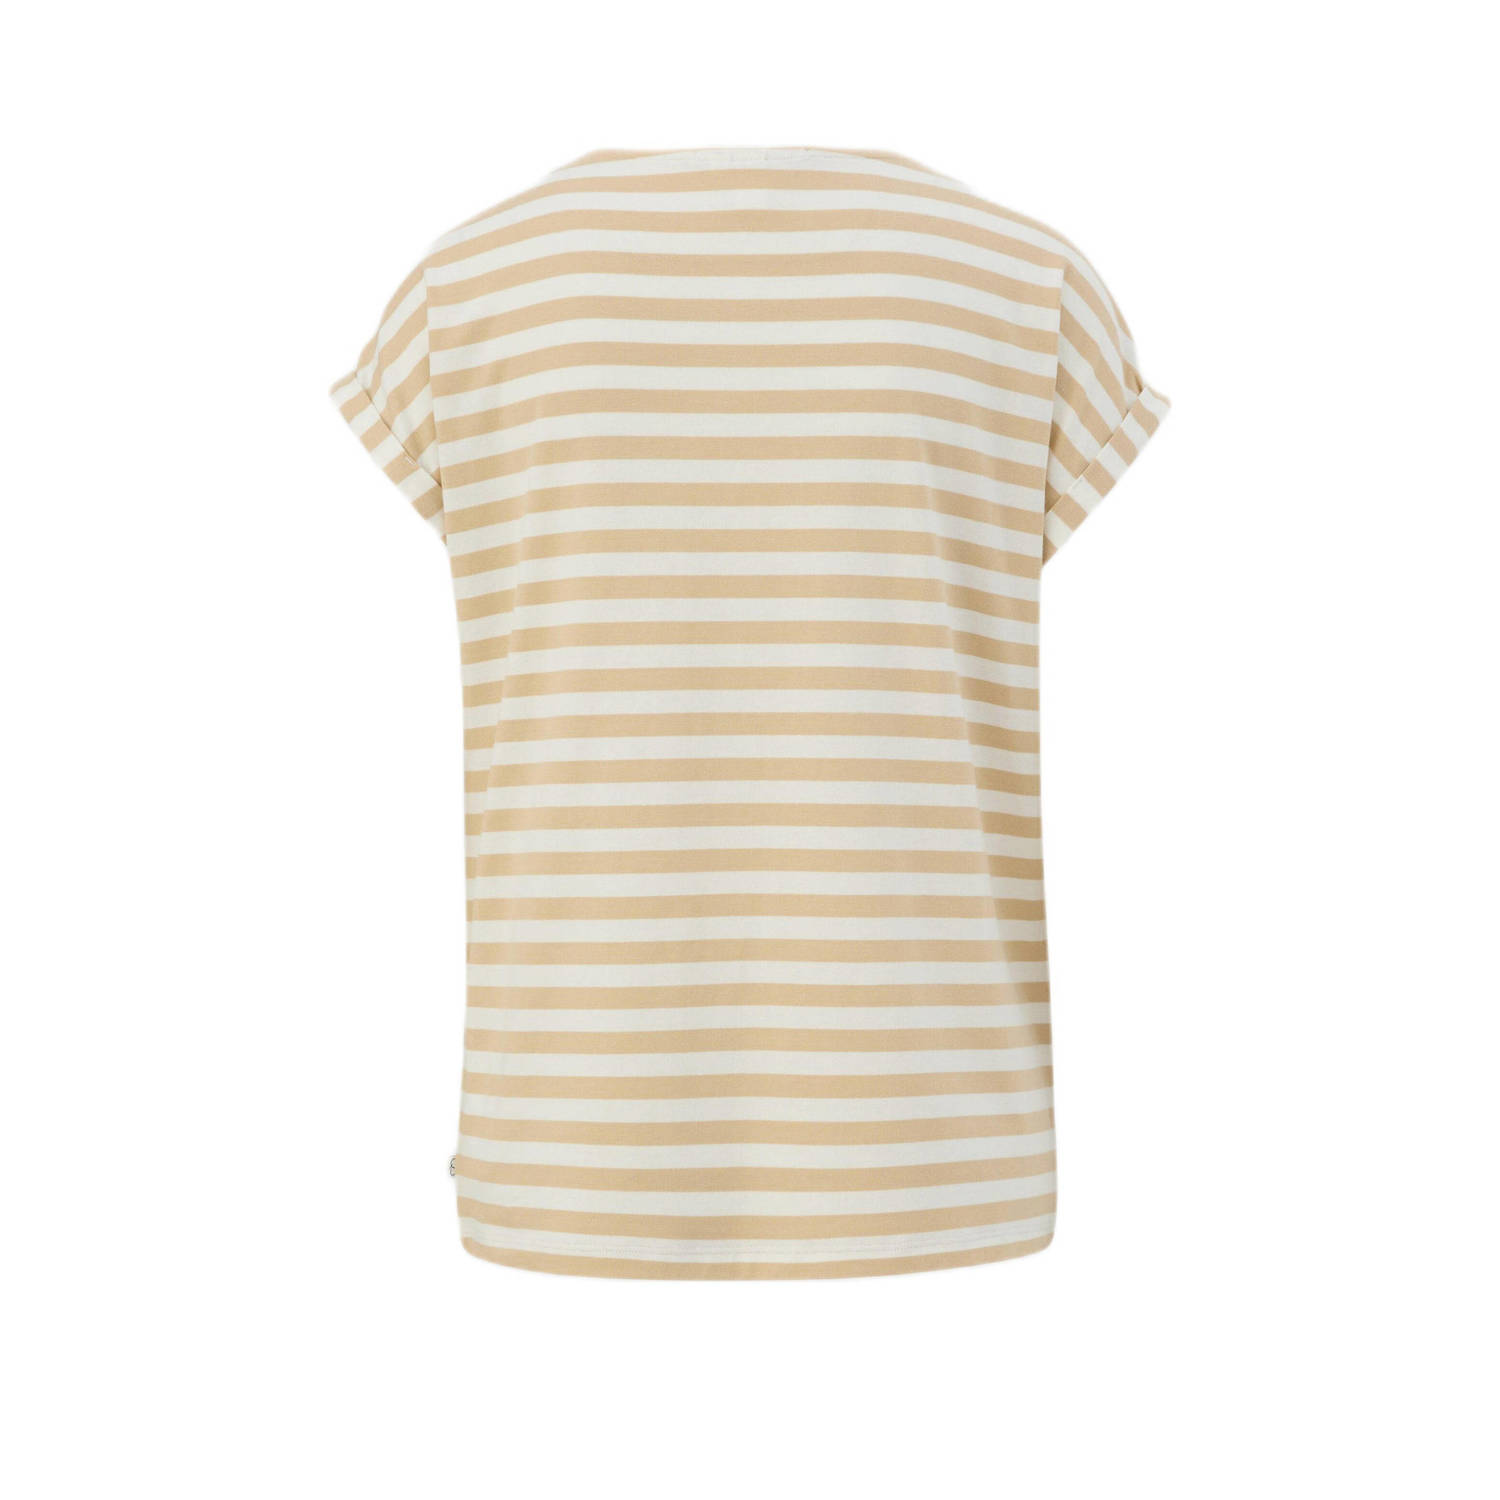 Q S by s.Oliver gestreepte top beige wit